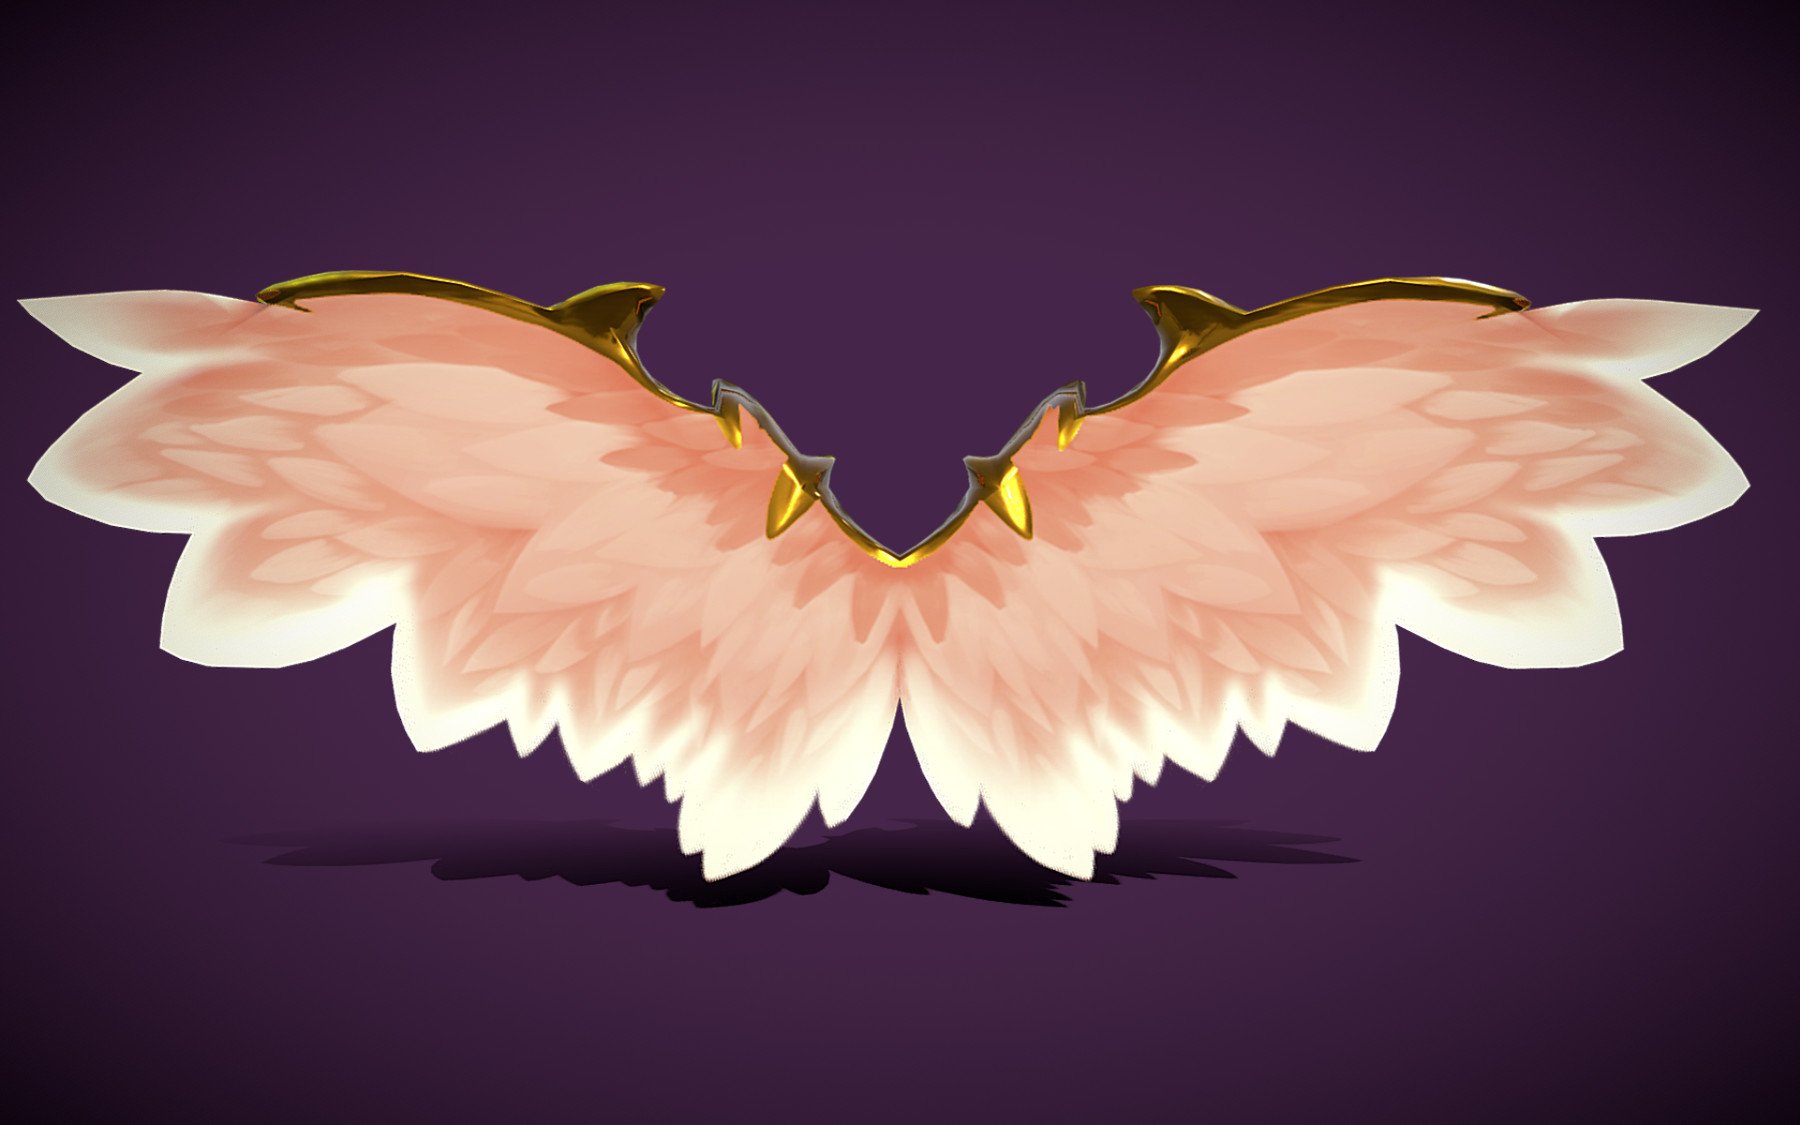 ArtStation - Animated-Low-Poly-Fairy-Angel-Wings | Game Assets